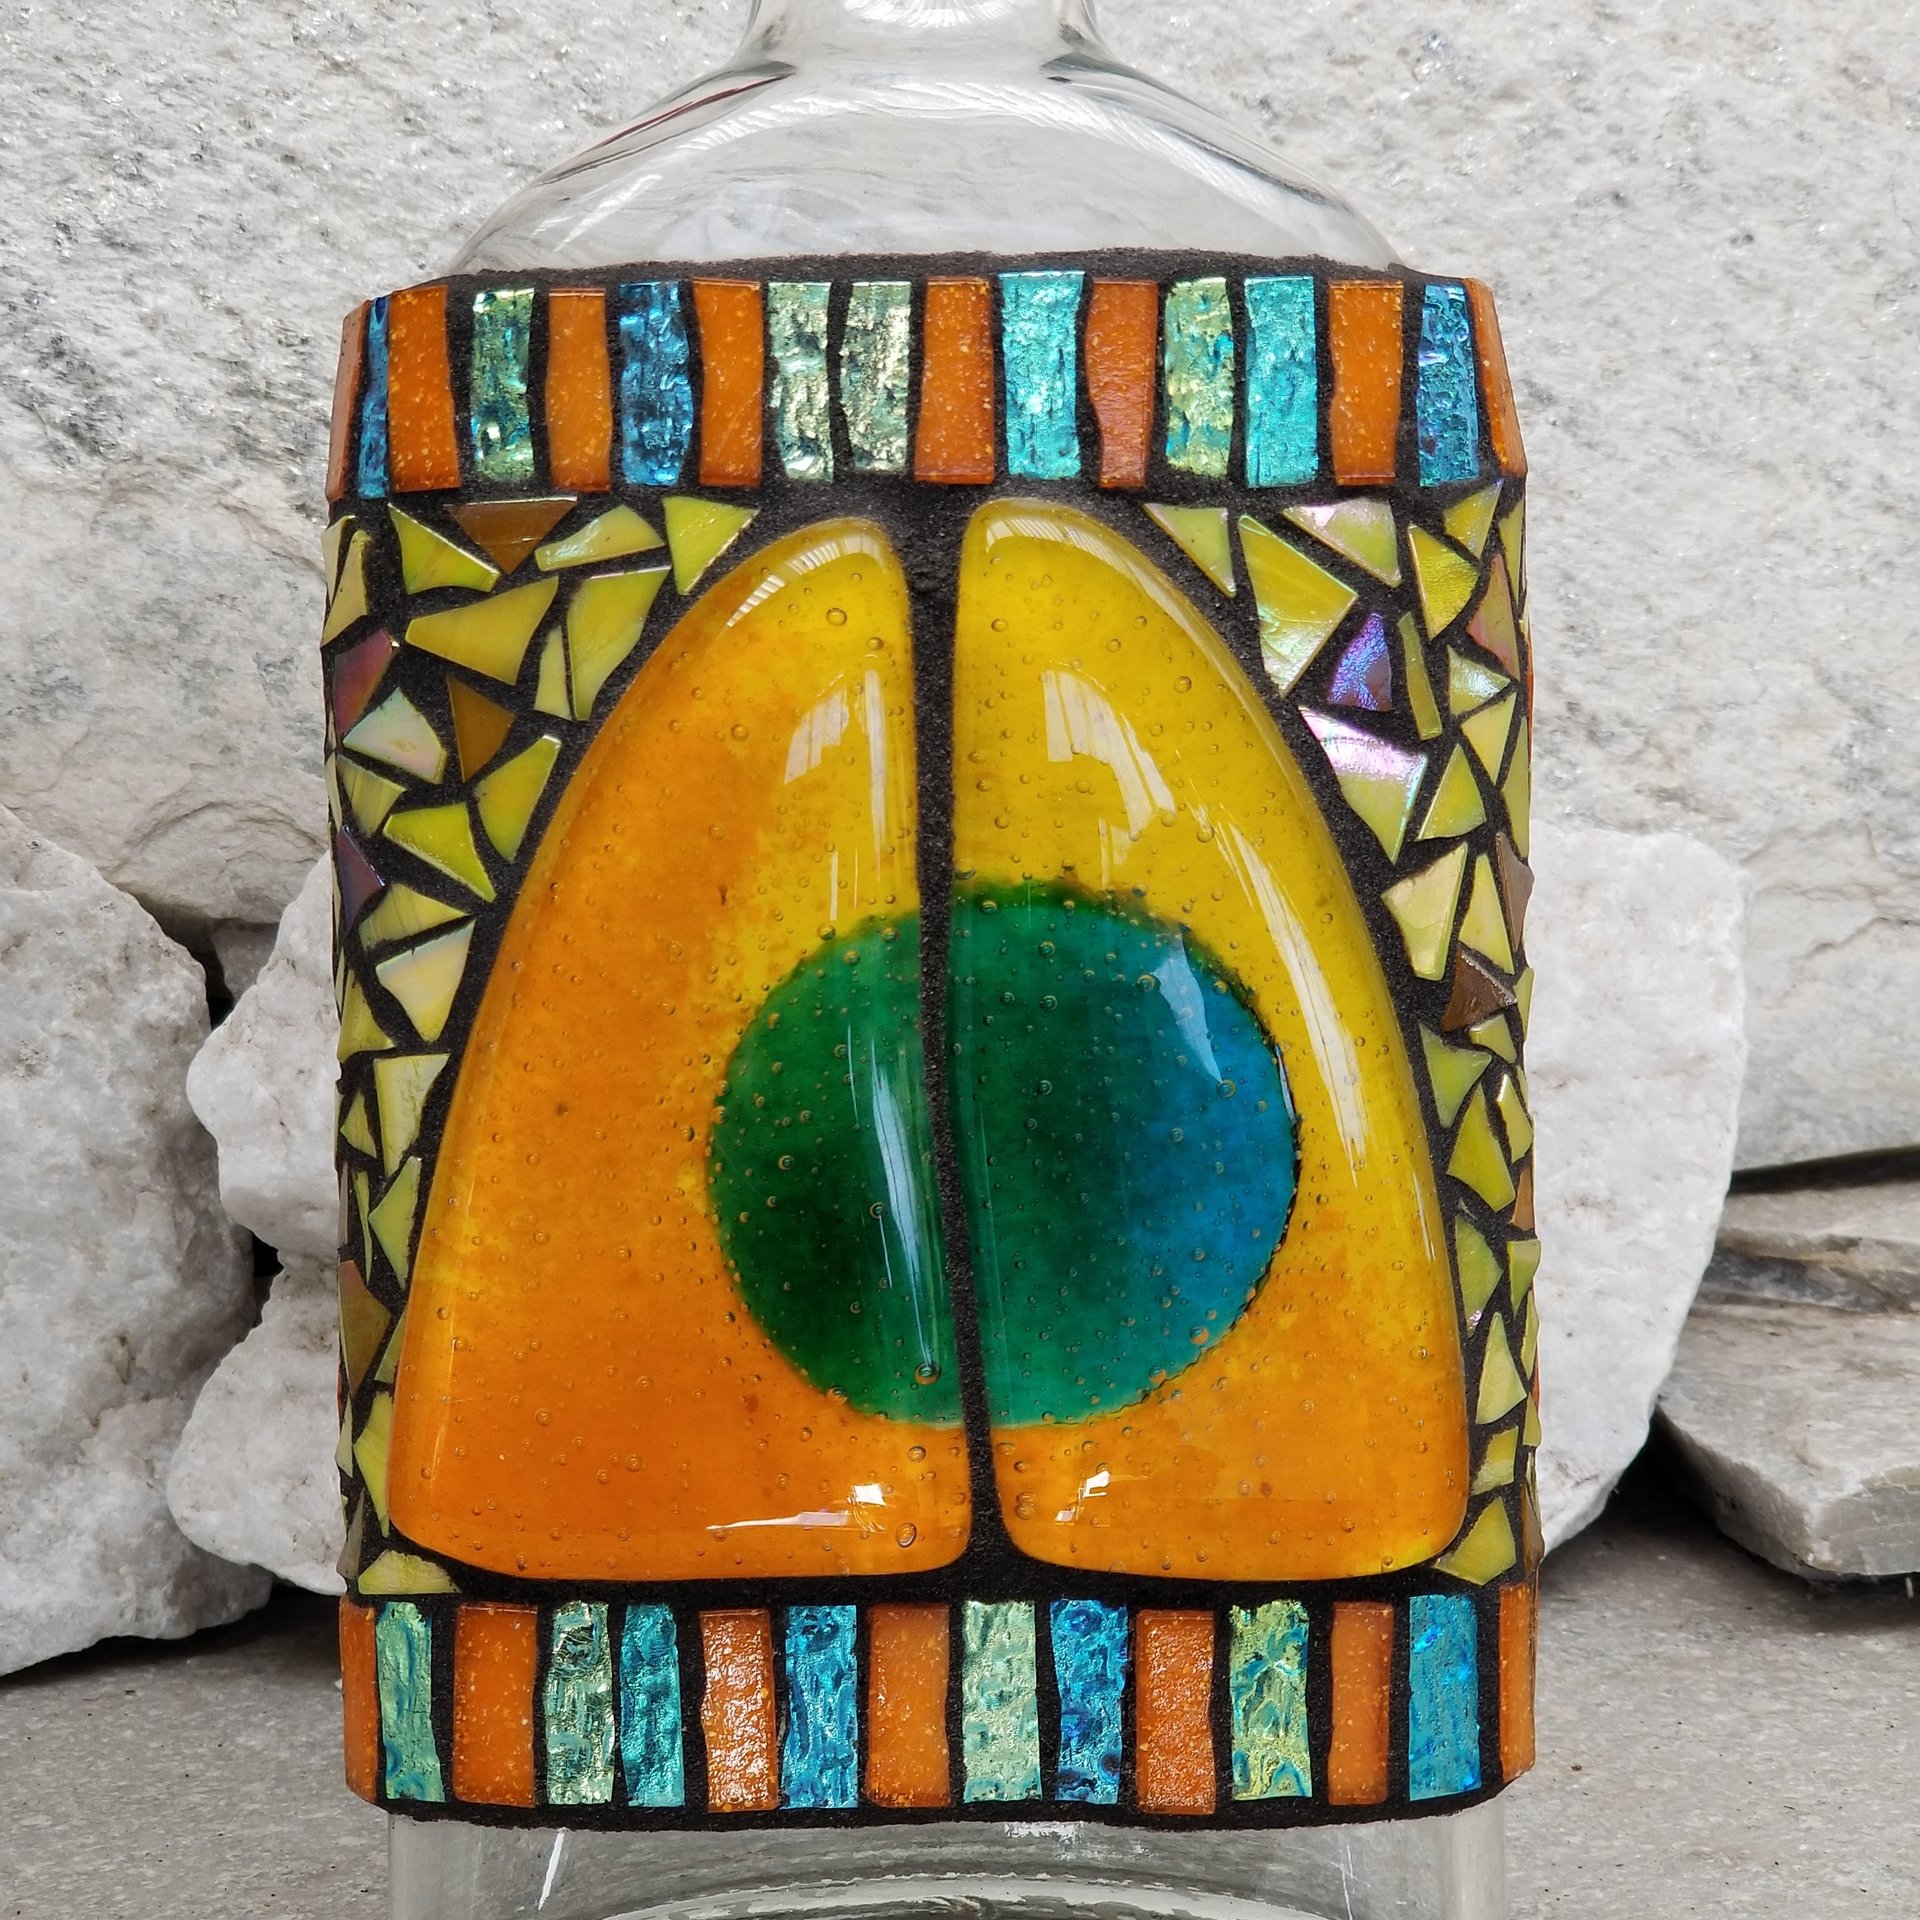 Mosaic Liquor Bottle "Twin Sails” Up-cycled Decanter